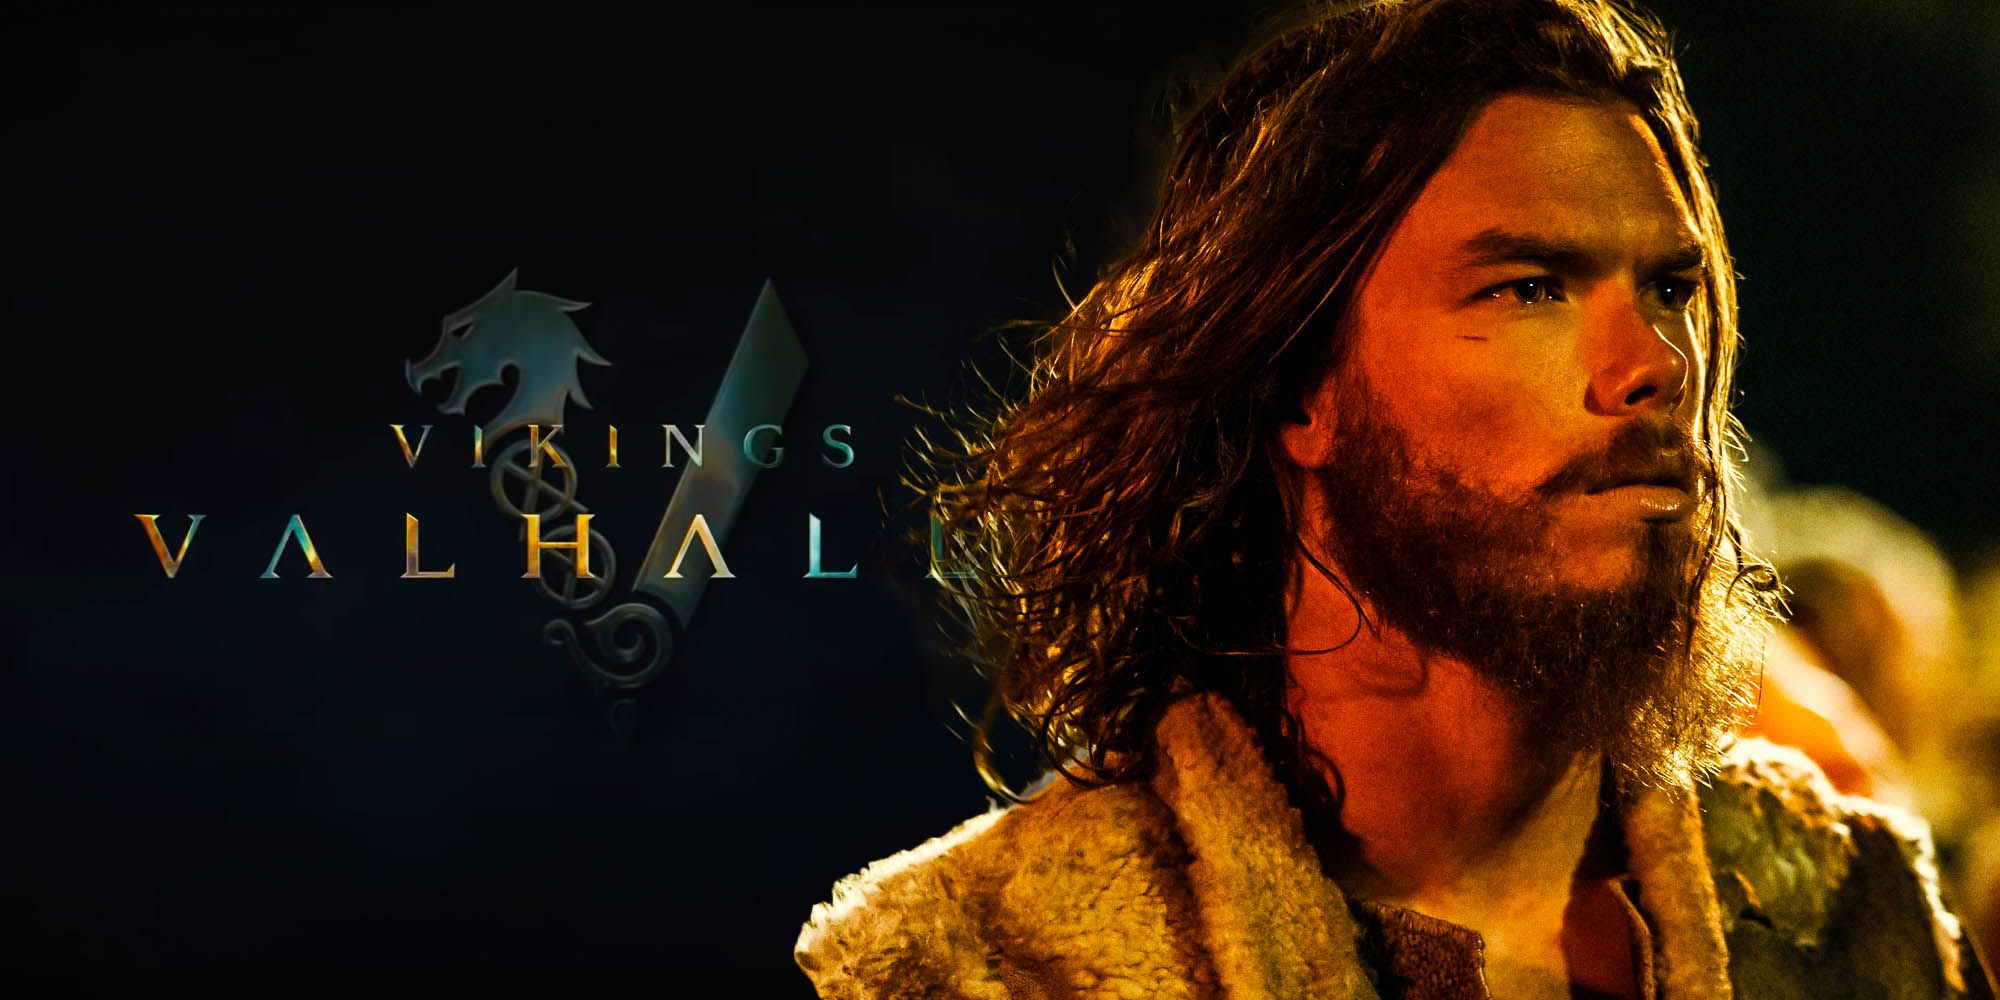 The title card for Vikings: Valhalla